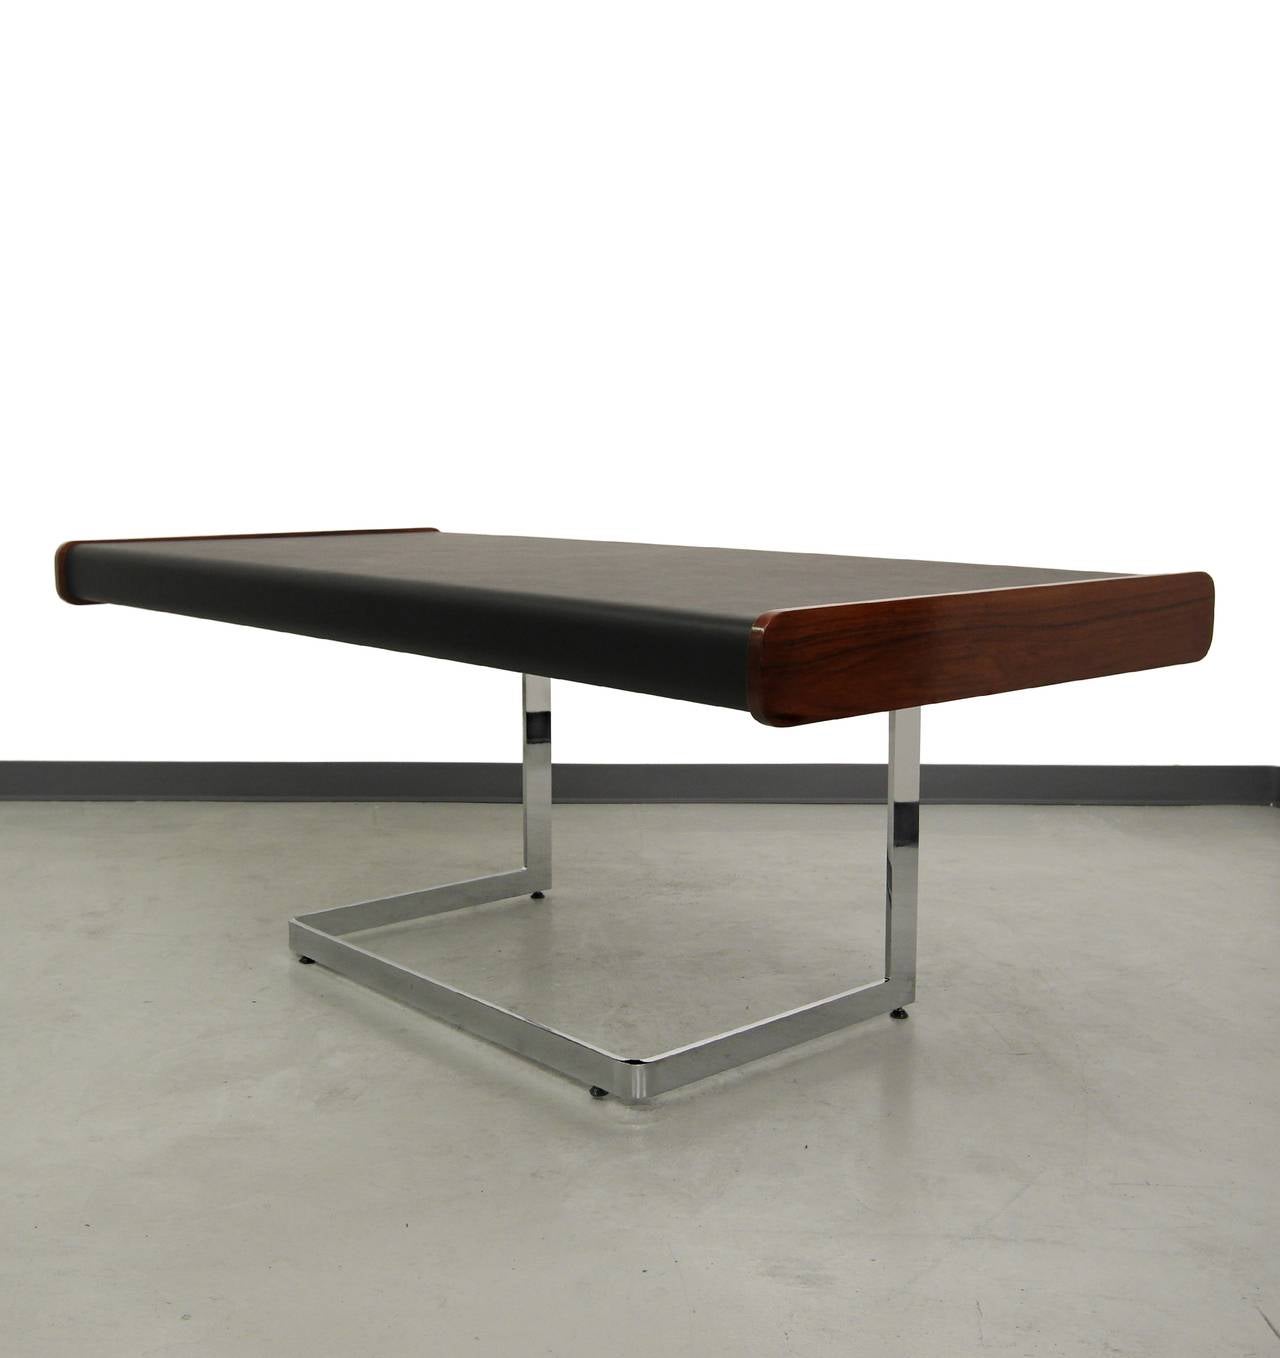 Absolutely gorgeous Rosewood and Chrome Executive Desk by Ste-Marie & Laurent of Canada.  Desk features beautiful rosewood grain, spotless chrome frame and mint condition black writing surface.  Spruce up your work space with this classy, minimalist